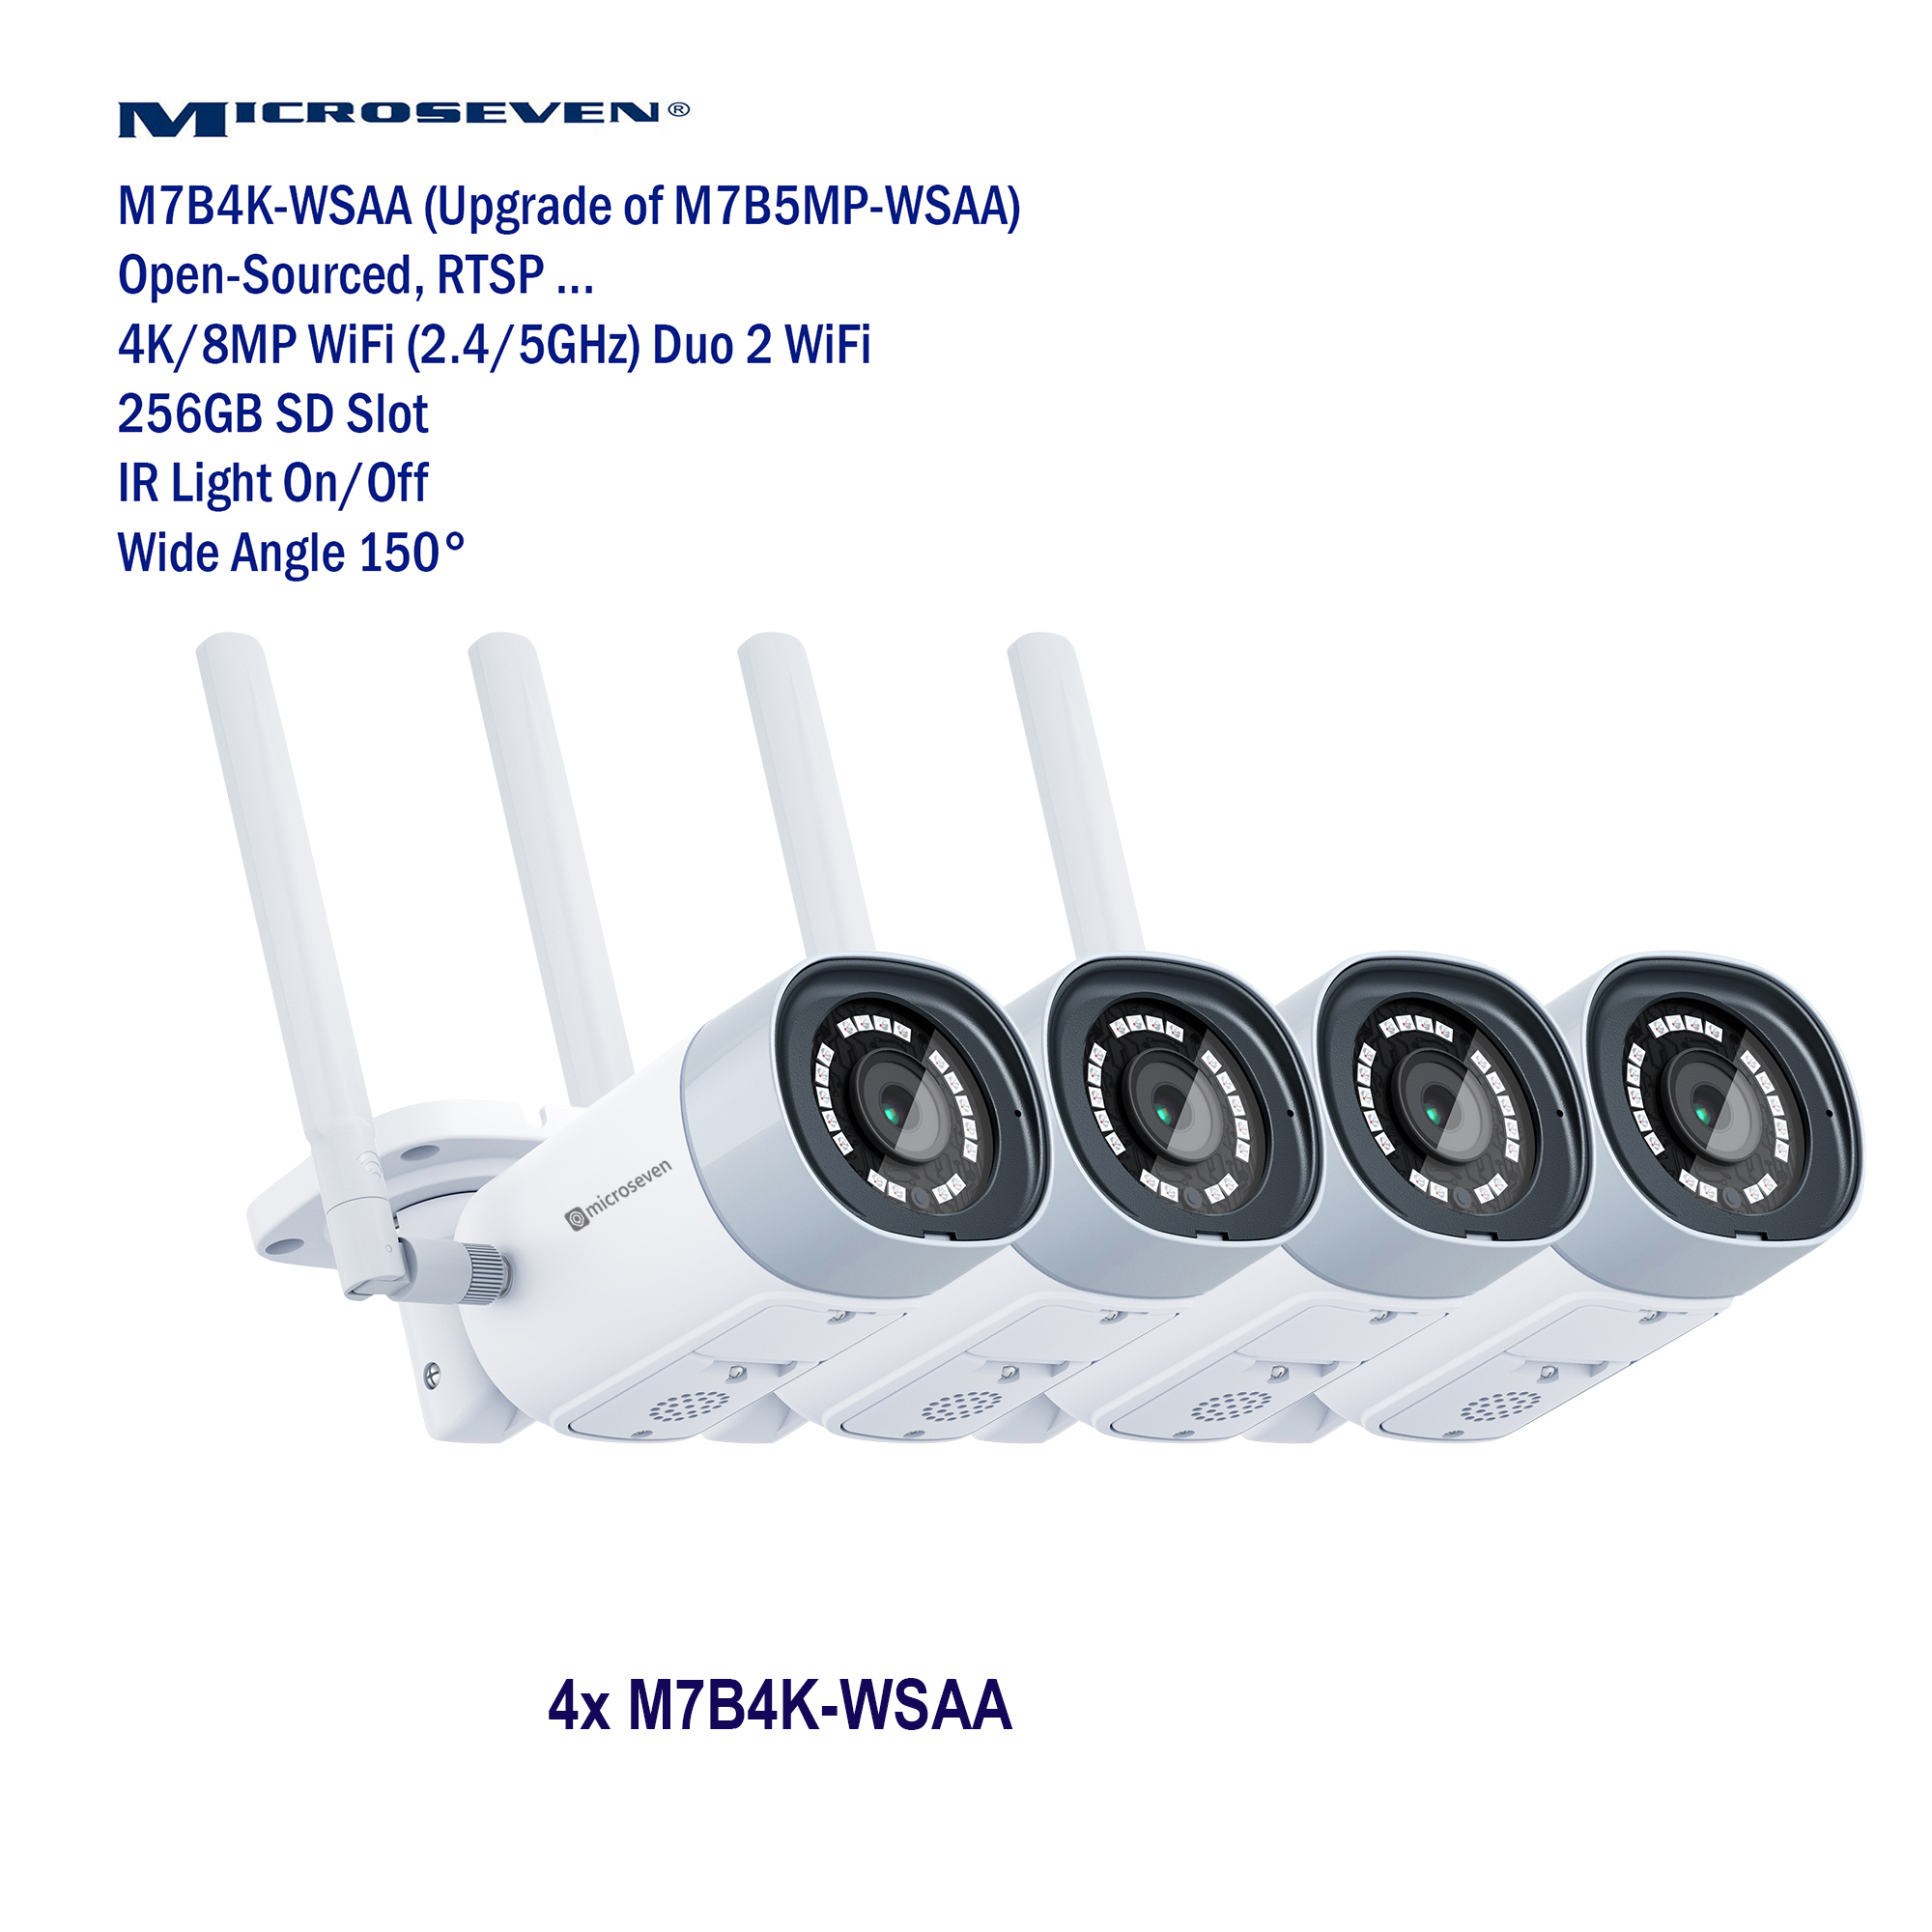 4x Microseven Open Source Ultra HD 4K/8MP(3840x2160) Duo 2 WiFi 2.4/5 GHz SONY 1/2.8" Chipset CMOS 2.8mm 8MP Lens Ultra-Wide Angle, Two-Way Audio with Built-in Amplified Microphone and Speaker plug and Play ONVIF, IR Light (On/Off in the APP) Security Outdoor IP Camera, Human/Vehicle Detection, 256GB SD Slot, Day & Night, Web GUI & Apps, CMS (Camera Management System) M7 Cloud Storage and Broadcasting on YouTube & Microseven